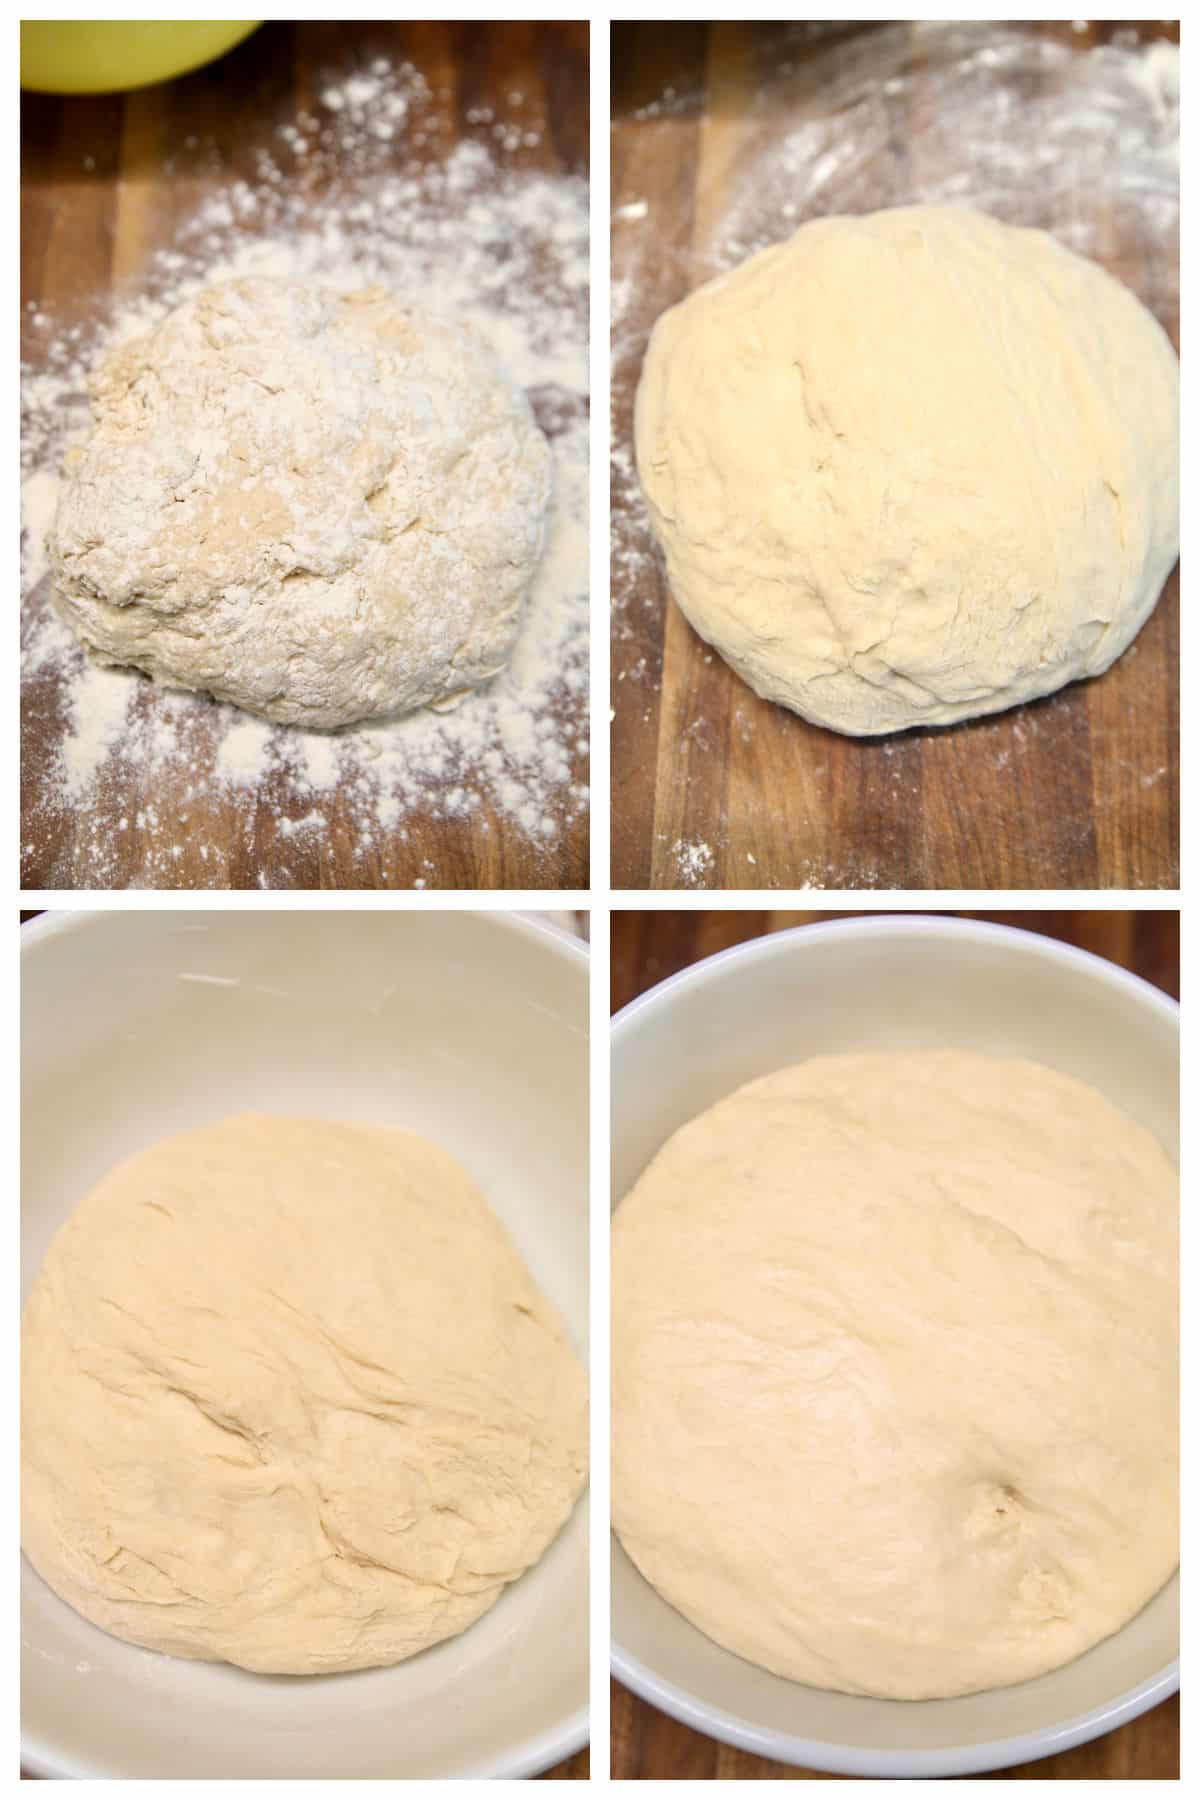 Kneading, rising sweet roll dough collage.